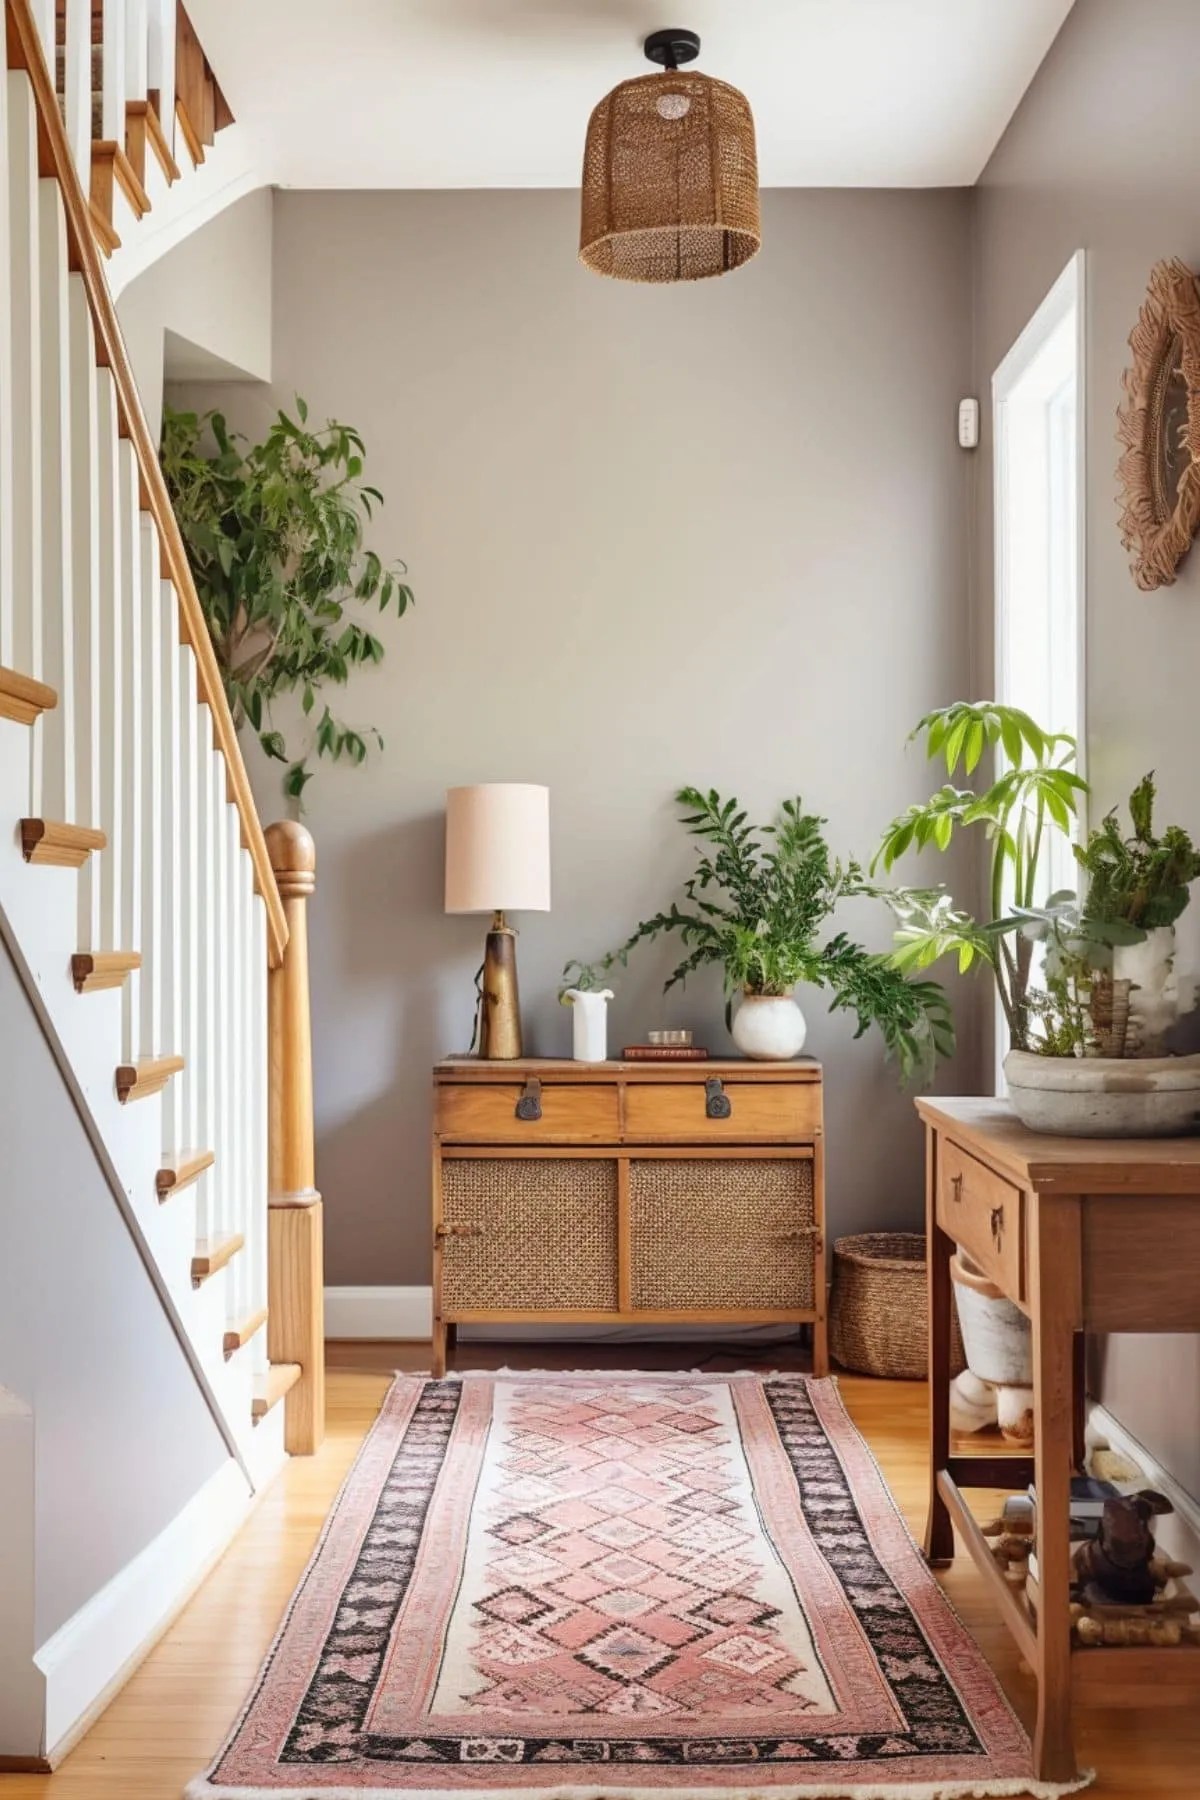 Hallway Ideas: 5 Styles to Try When Renovating a Hallway